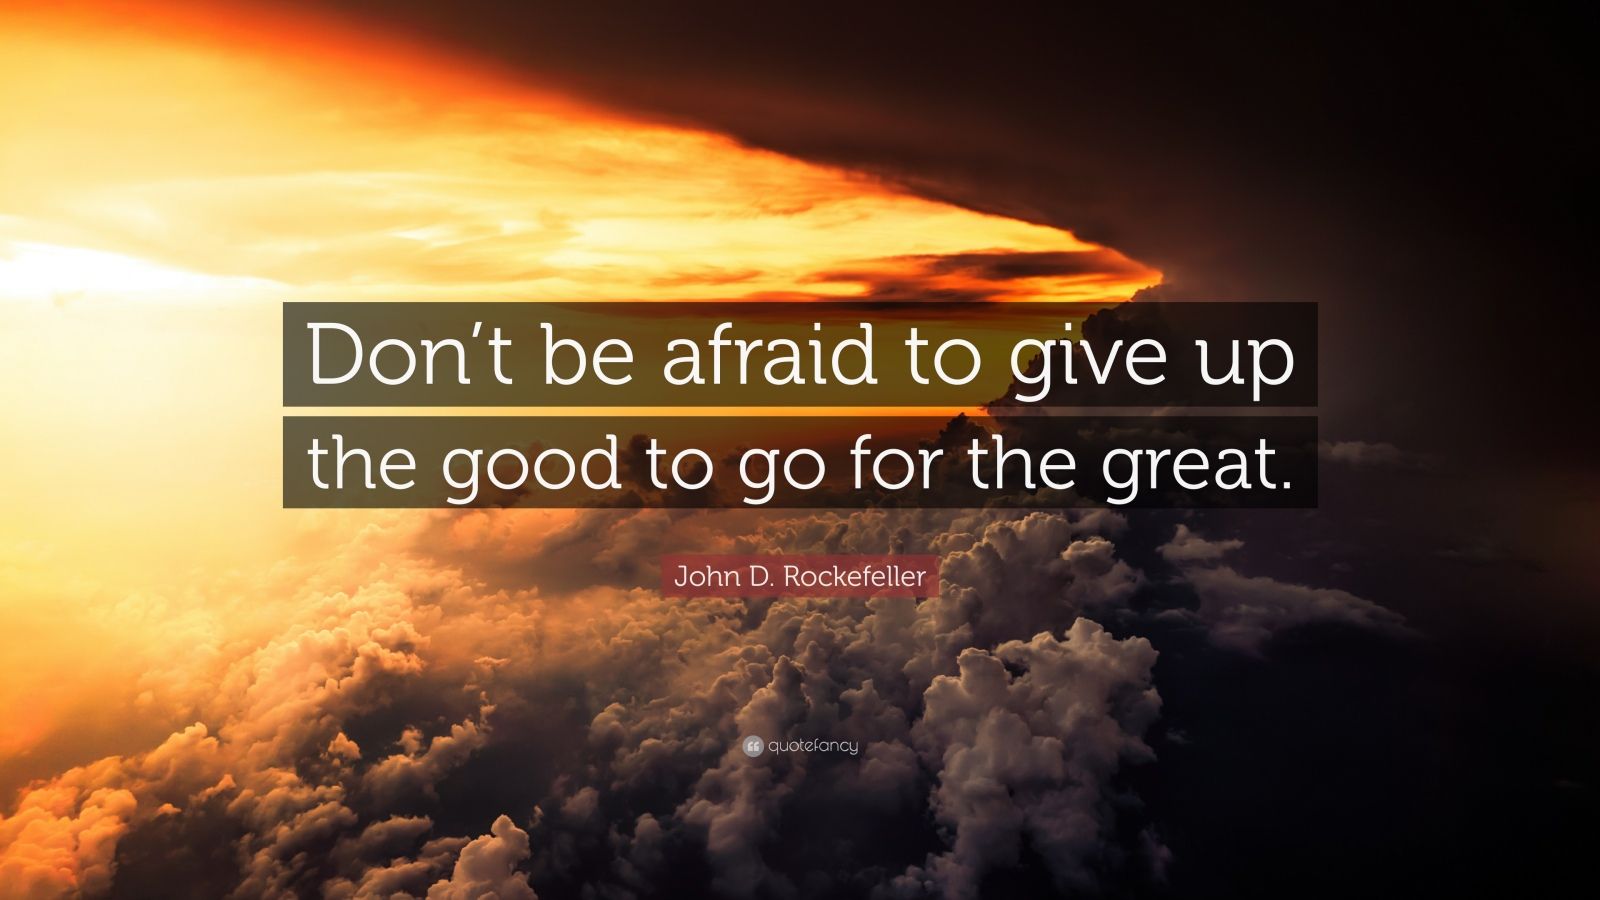 1704169 John D Rockefeller Quote Don t be afraid to give up the good to go